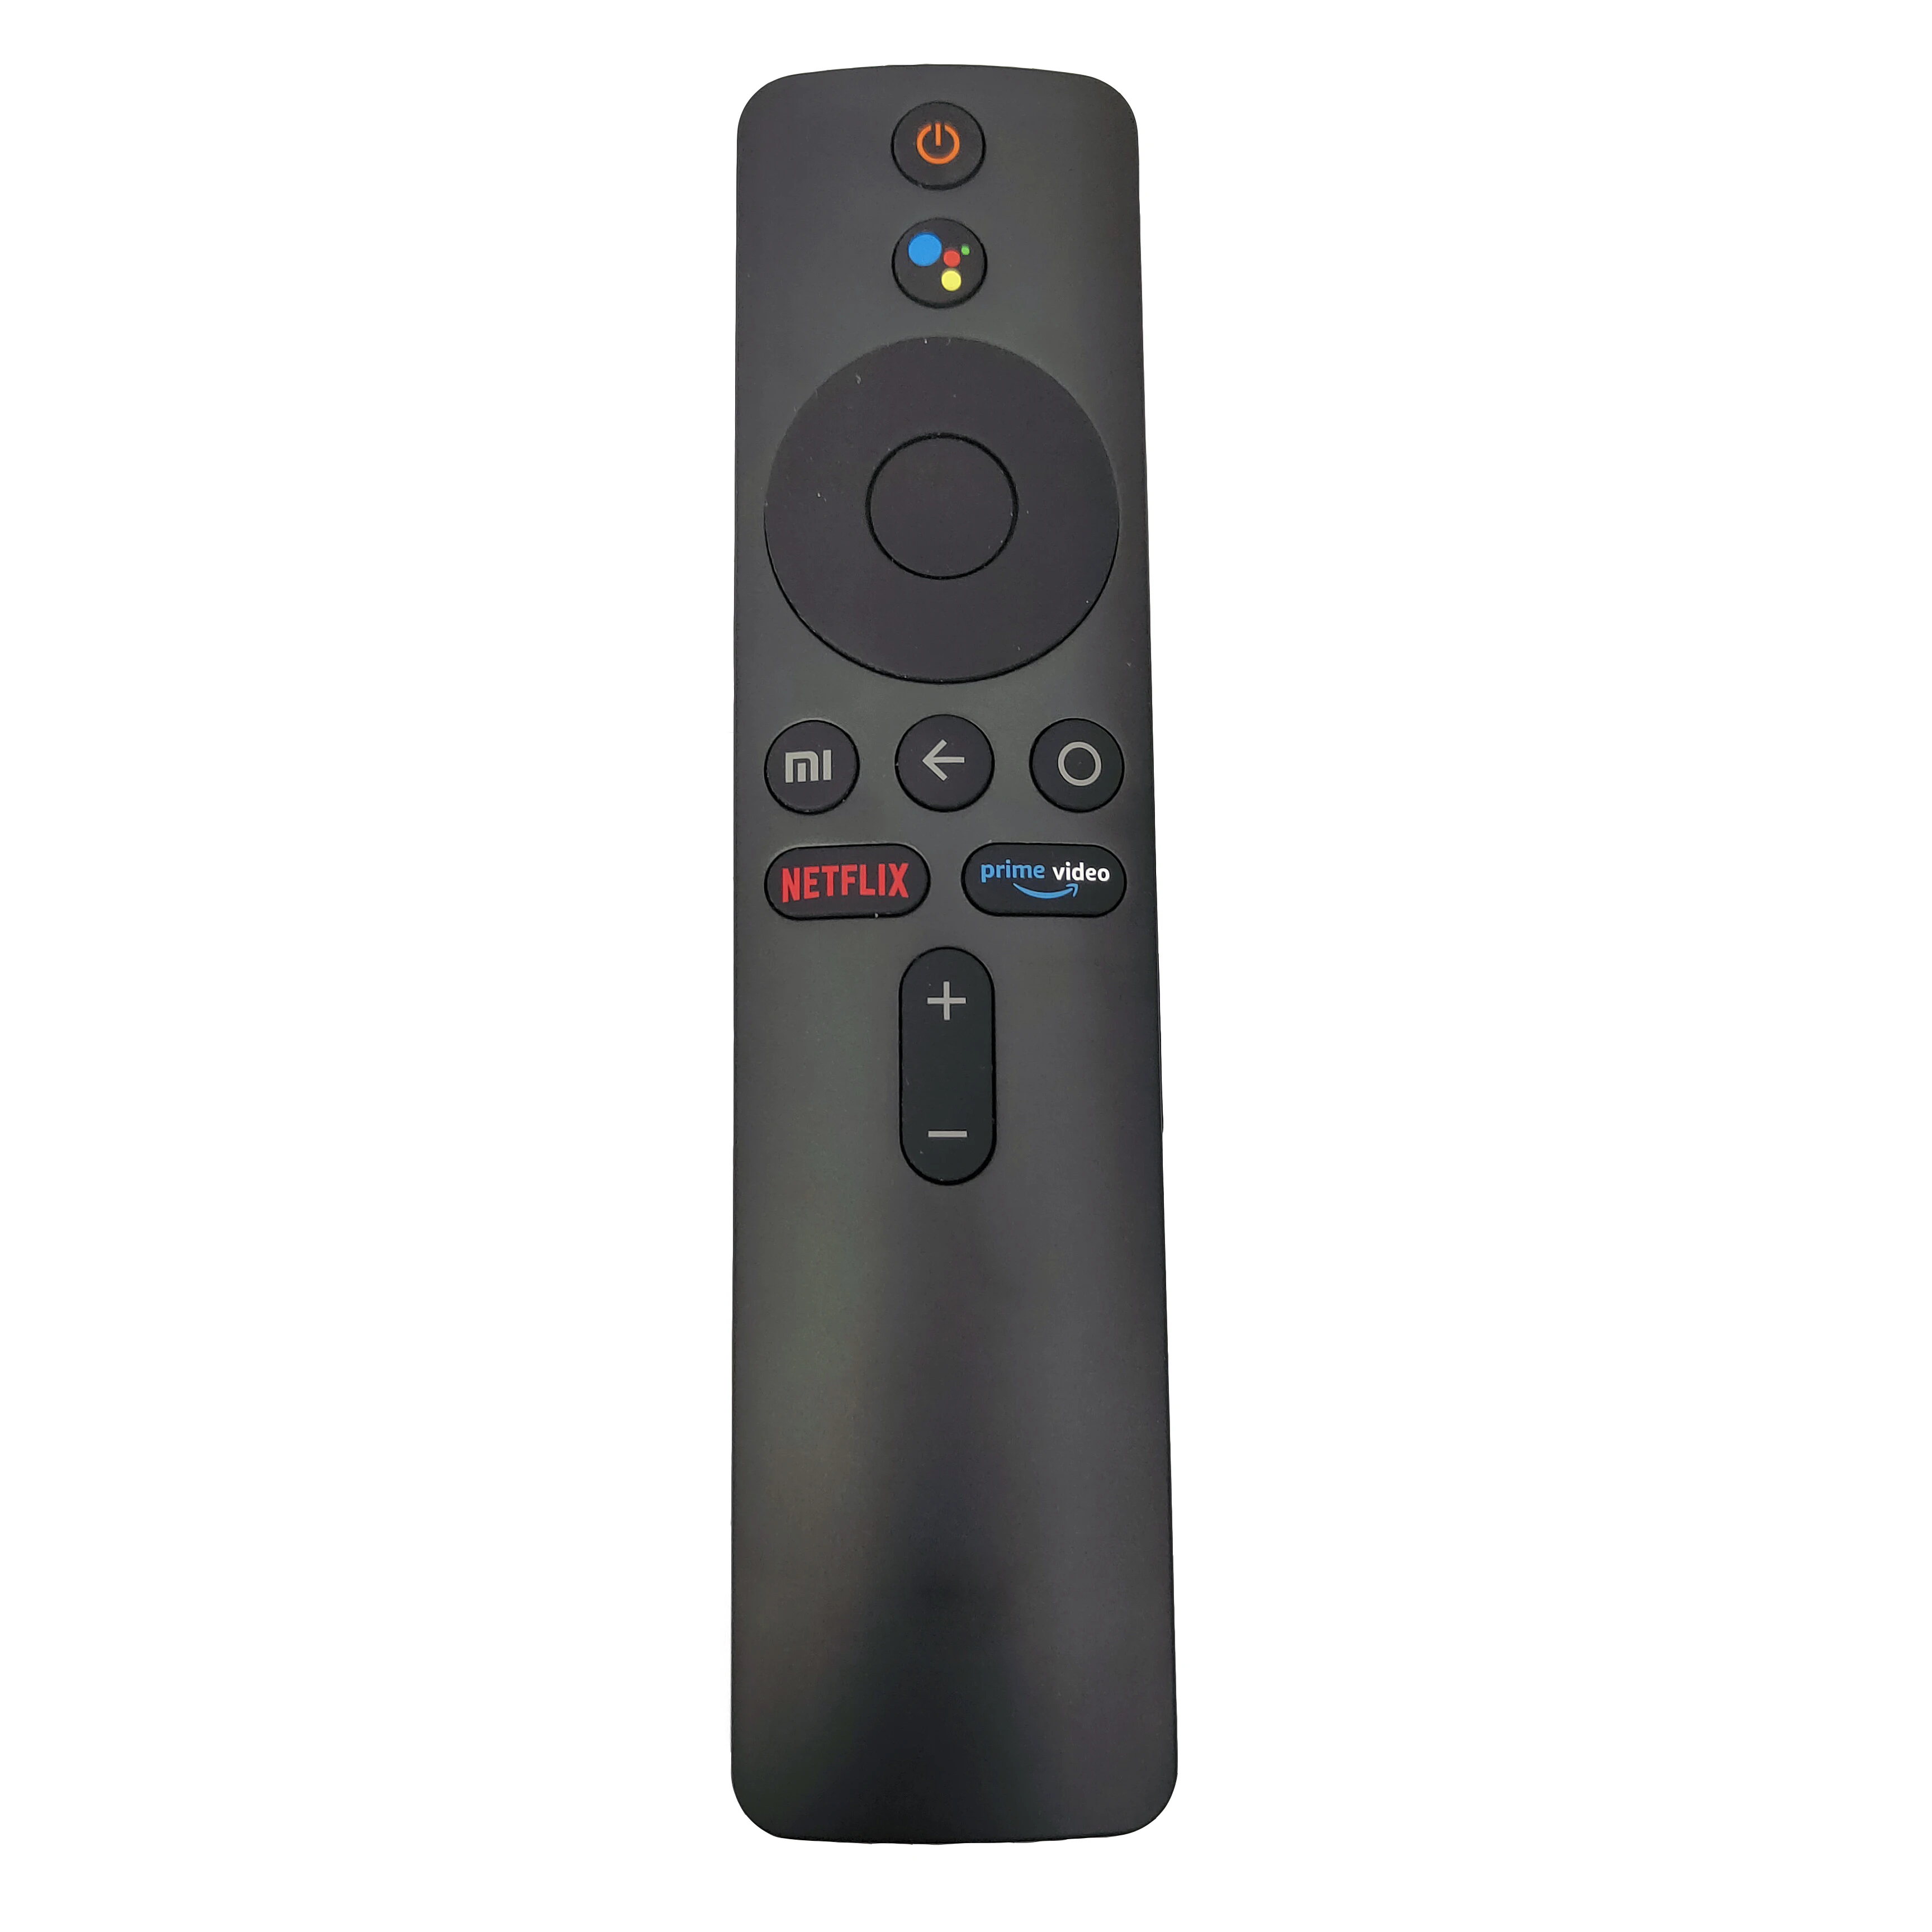 New original Remote Control For xiaomi TV Google assistant voice Bluetooth Netflix prime video smart TV LCD HDTV Android remote